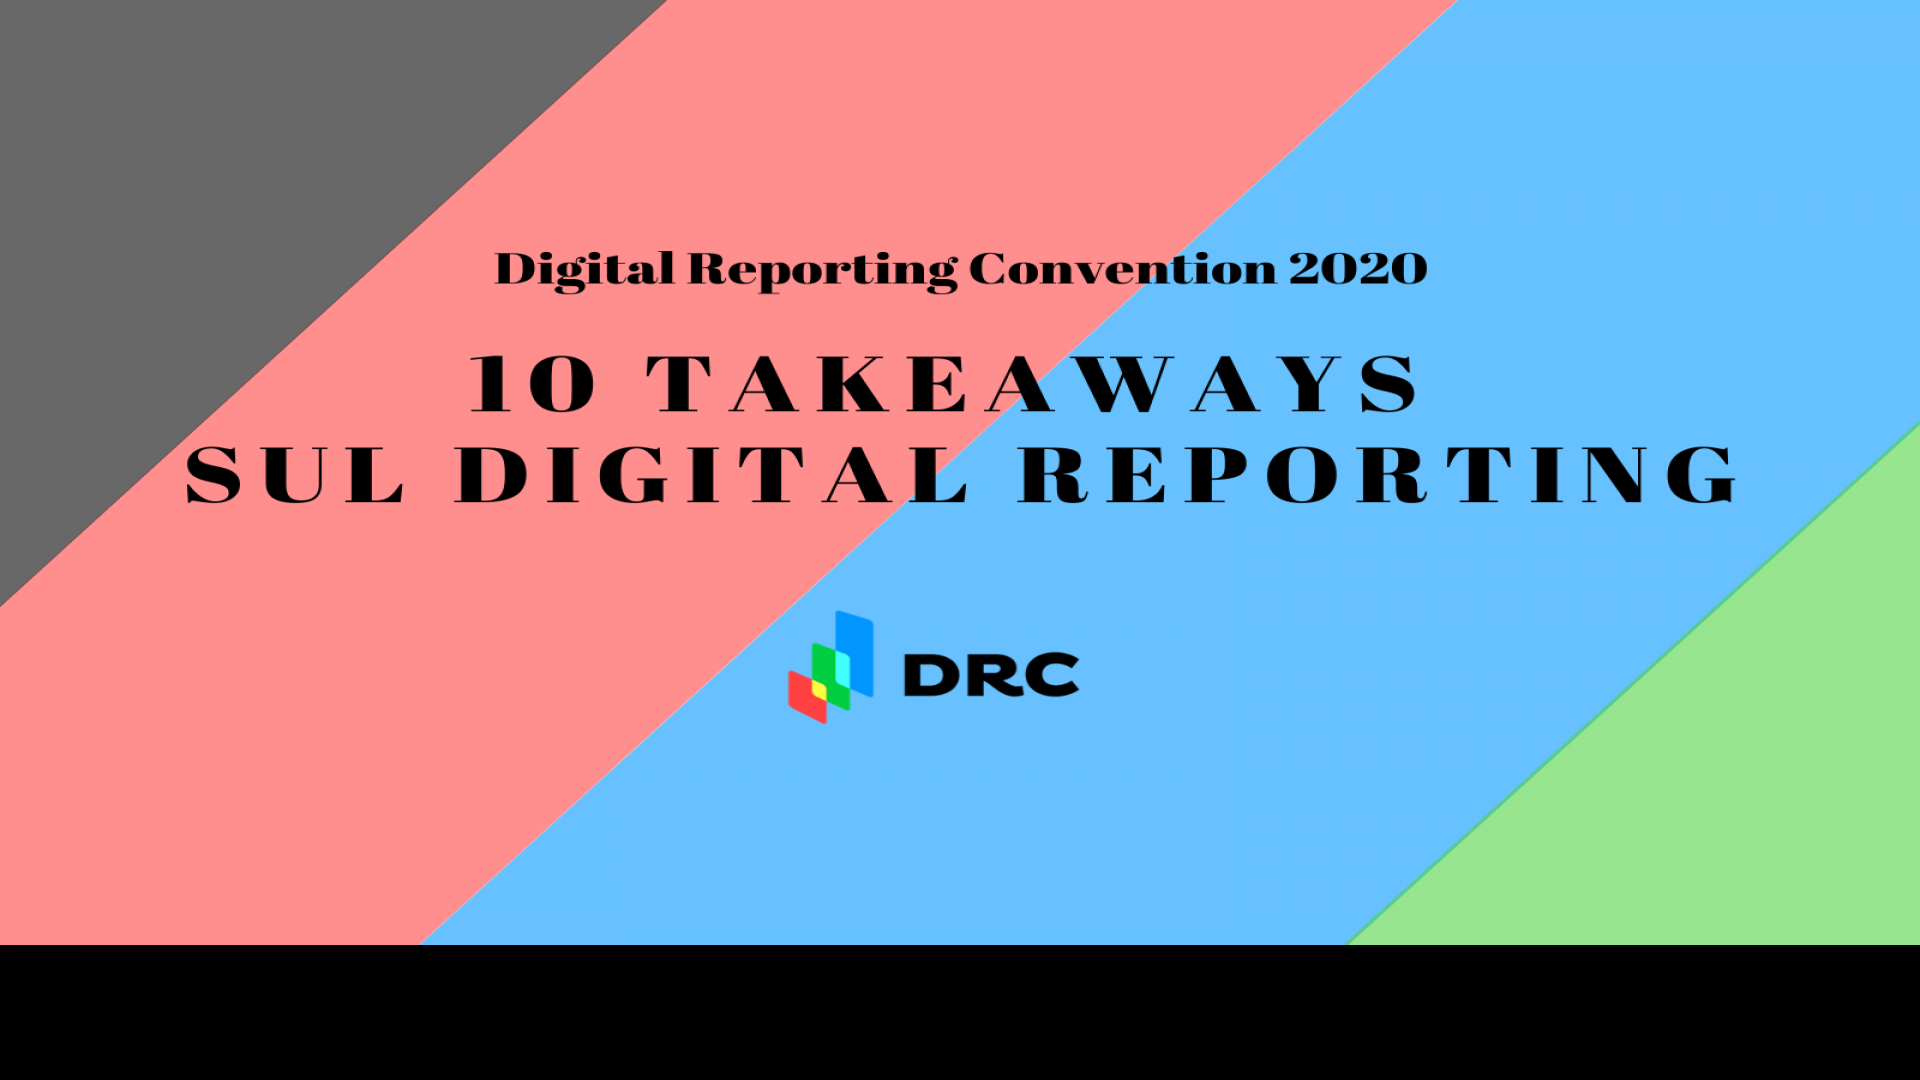 Digital Reporting Convention 2020